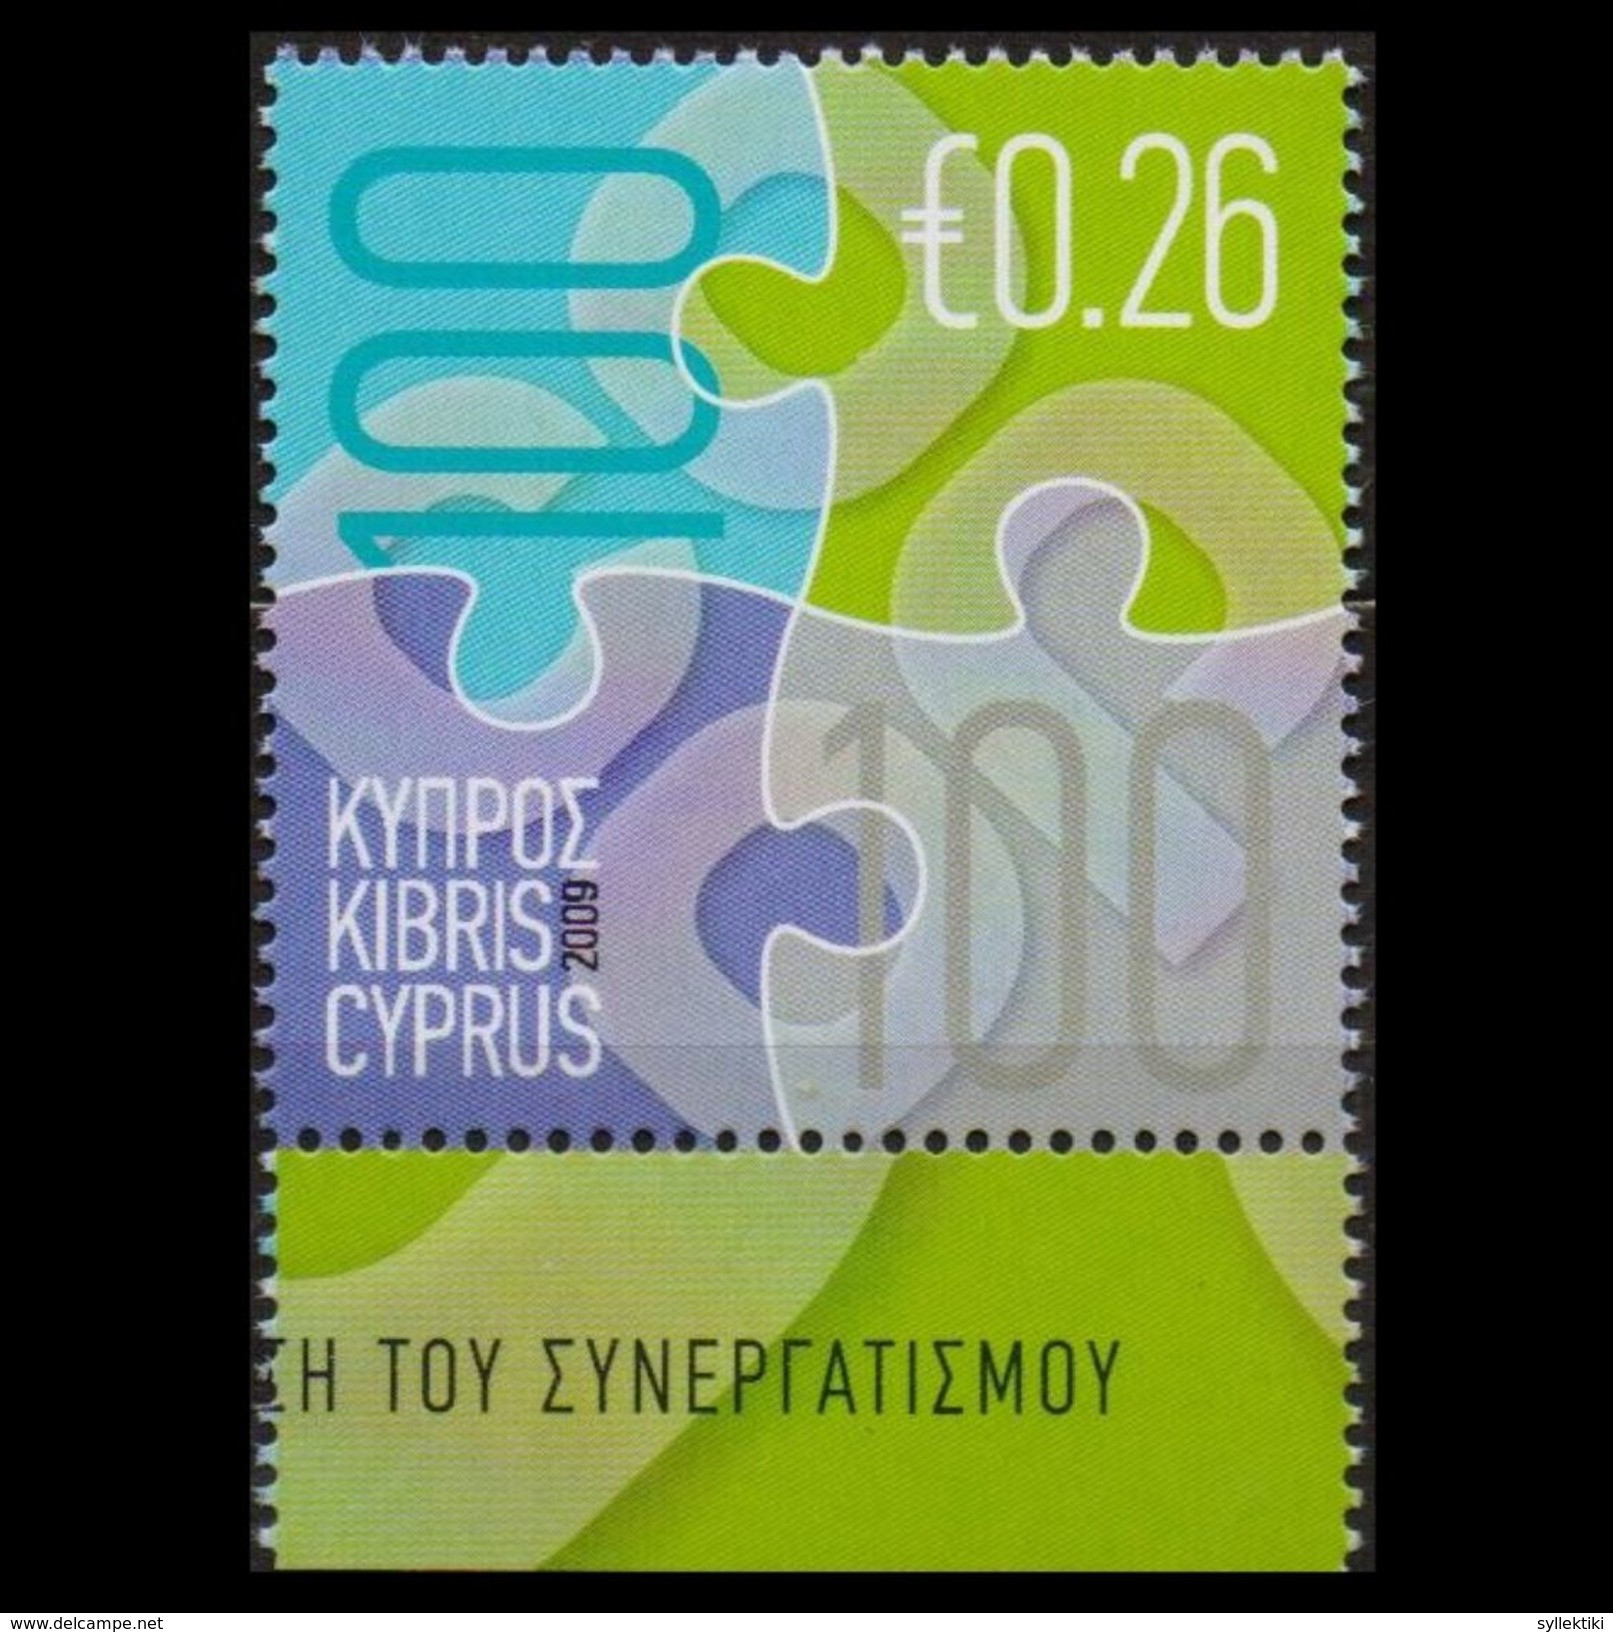 CYPRUS 2009 COOPERATION MNH STAMP - Unused Stamps